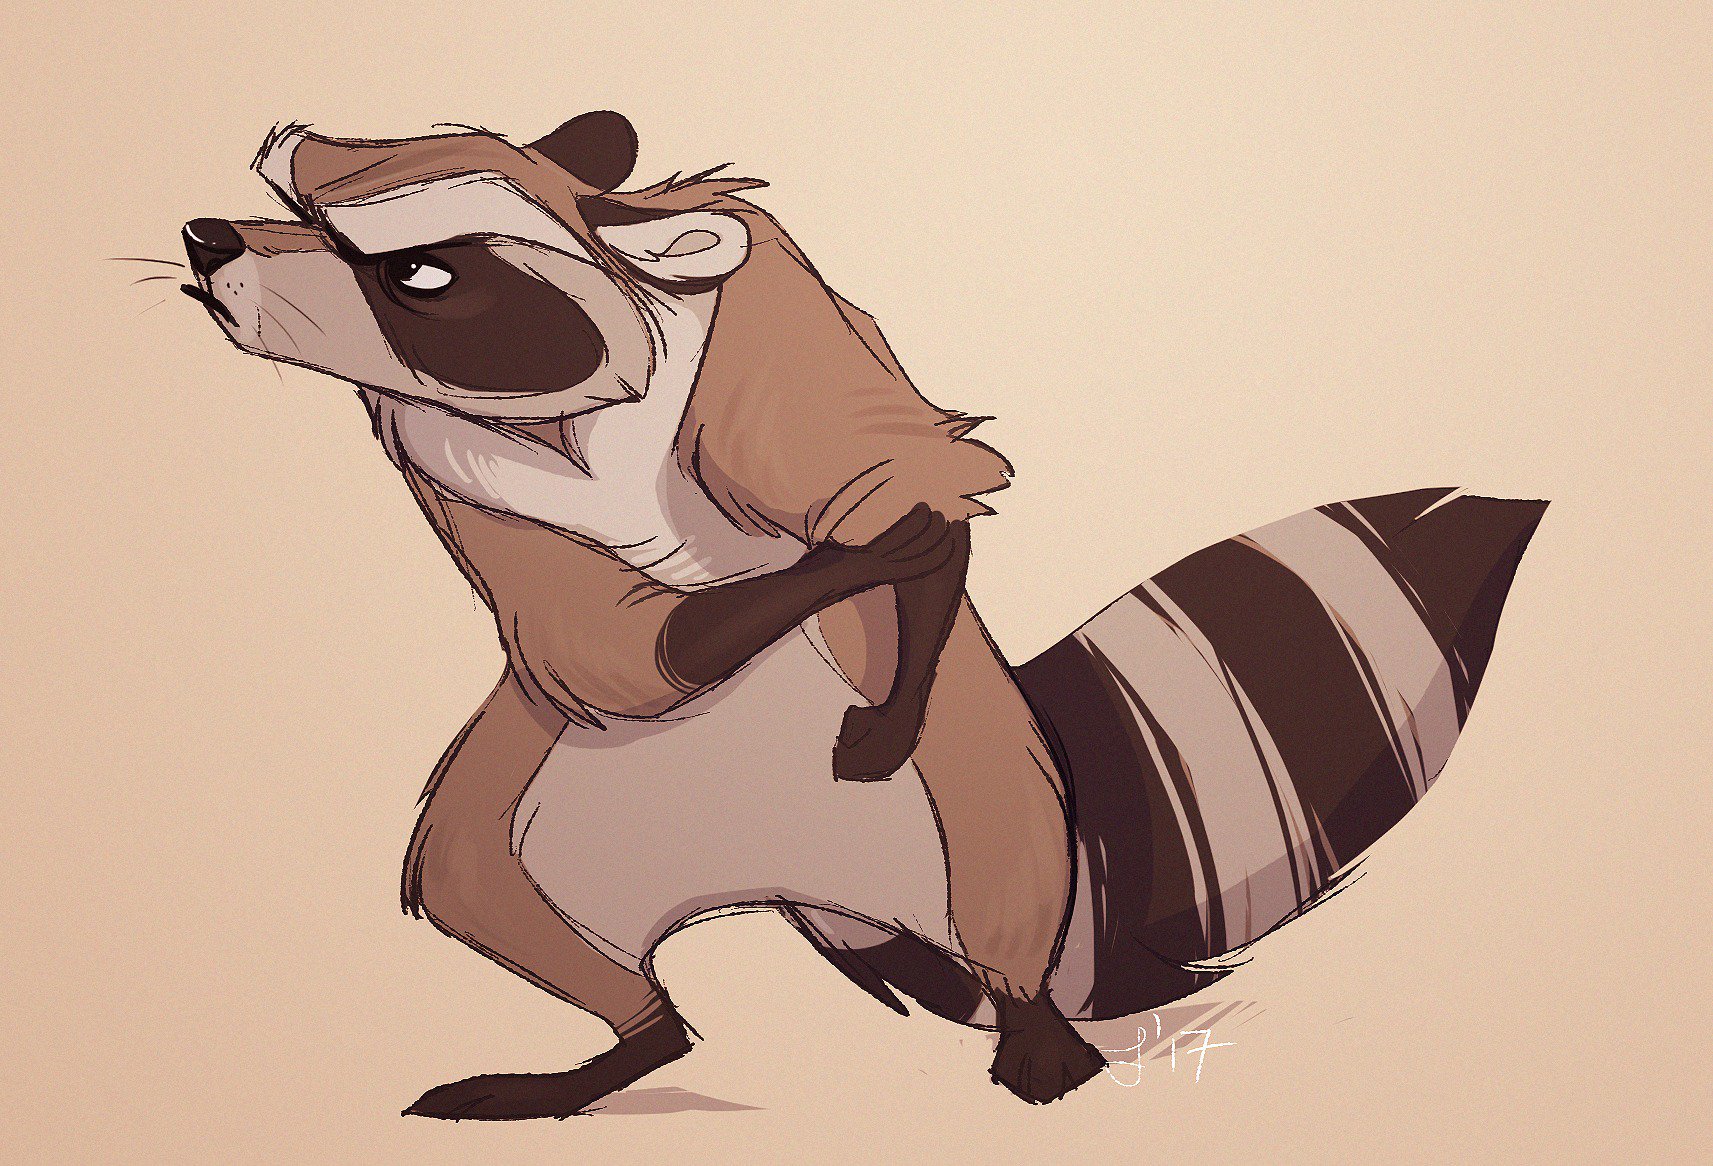 “angry little raccoon dude ready to kick some major ass” .